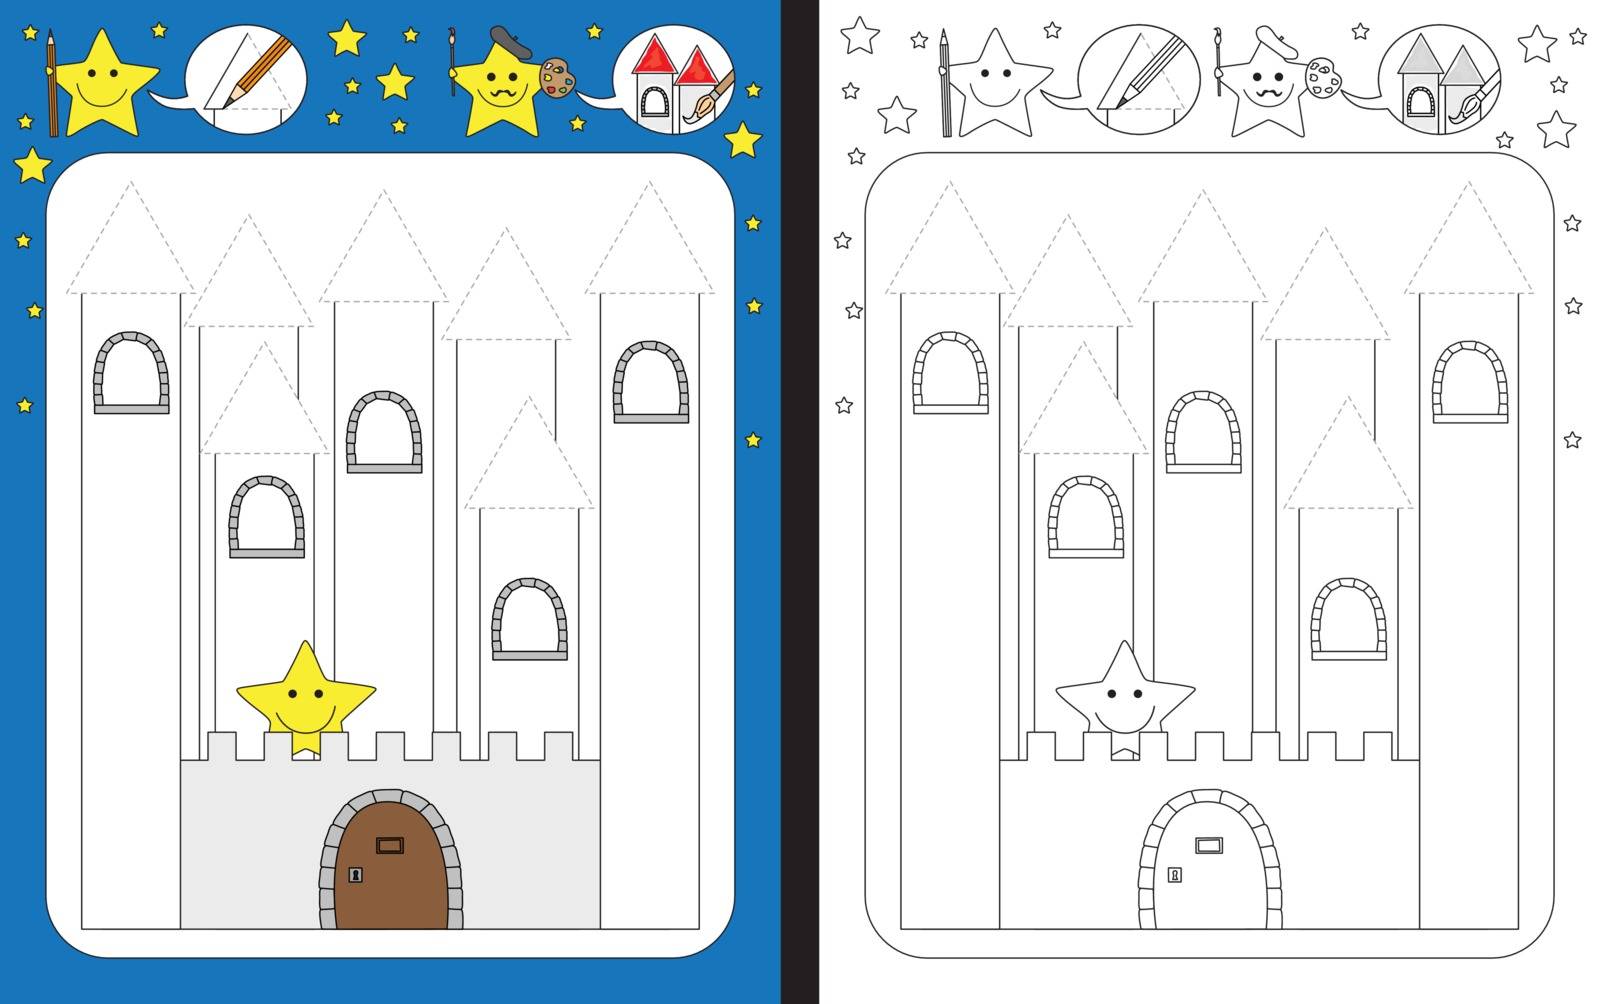 Preschool worksheet for practicing fine motor skills - tracing dashed lines of castle towers